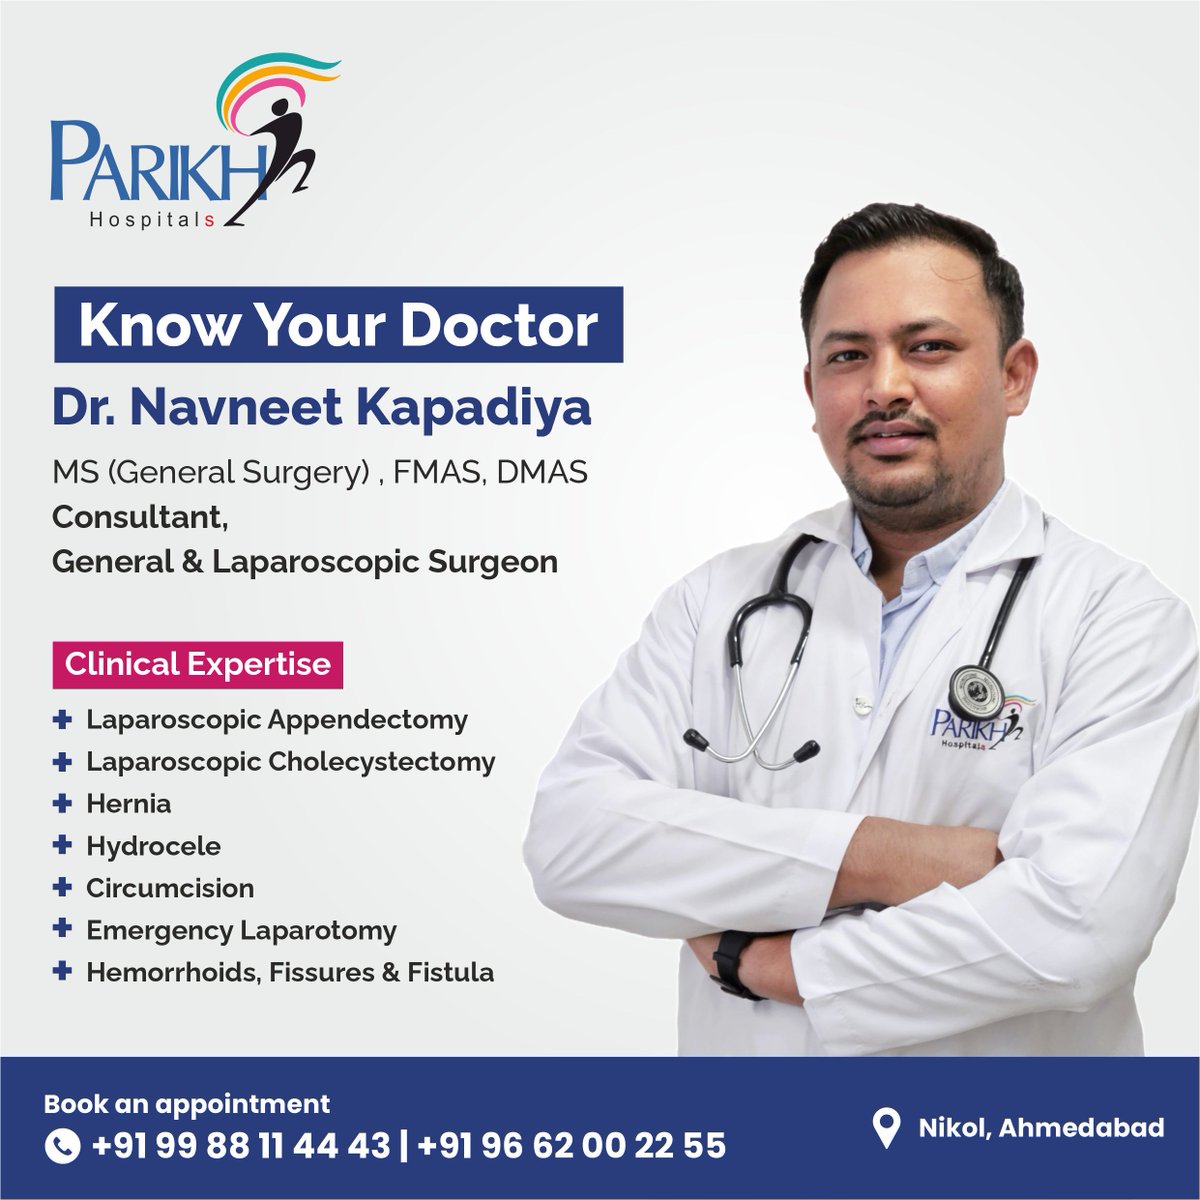 Meet Dr. Navneet Kapadiya - a highly trained Specialist General & Laparoscopic Surgeon at #ParikhHospitals, #Nikol, #Ahmedabad. He is an expert in diagnosing and treating all #General & #Laparoscopic surgery. For the best in-class #treatments contact us today!